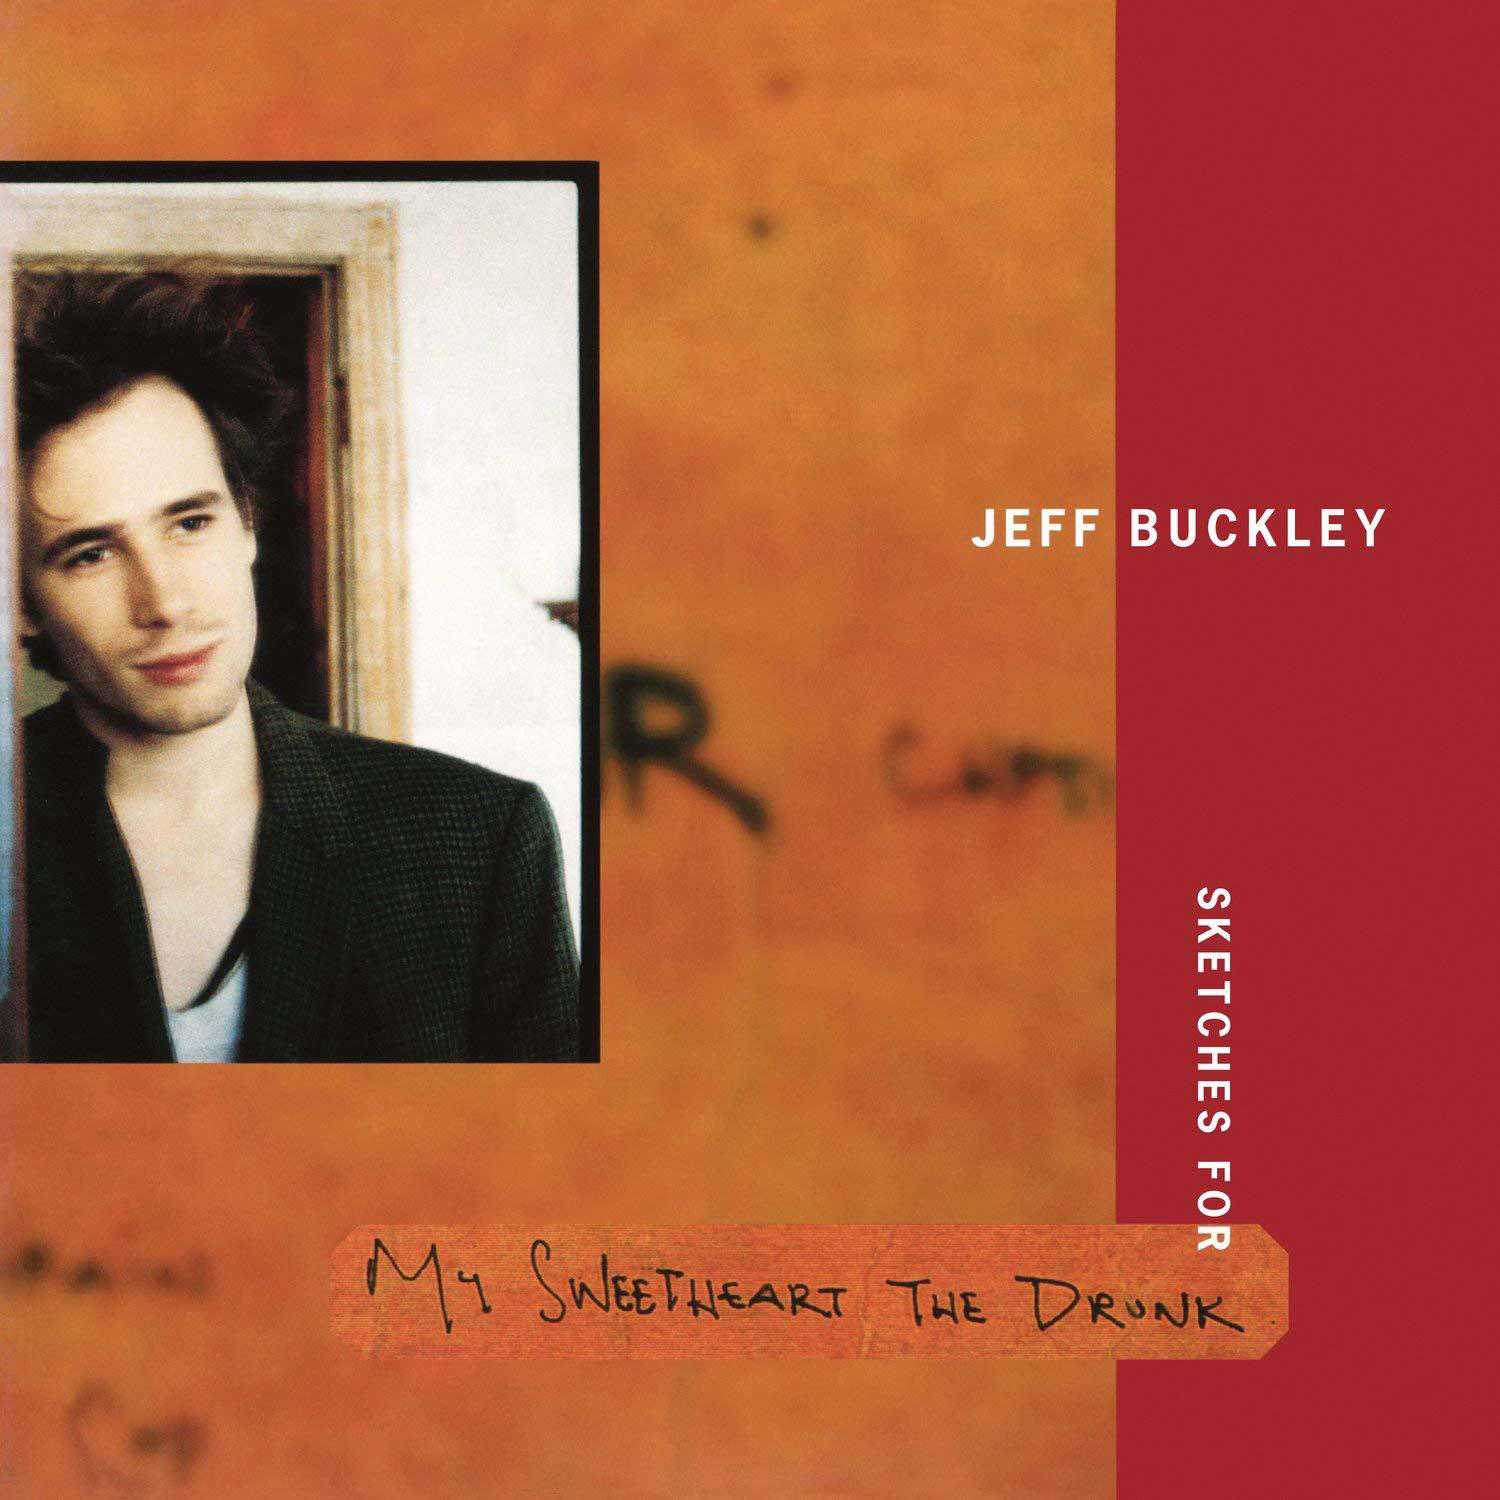 Jeff Buckley - Sketches for My Drunk The Sweetheart (Vinyl) 